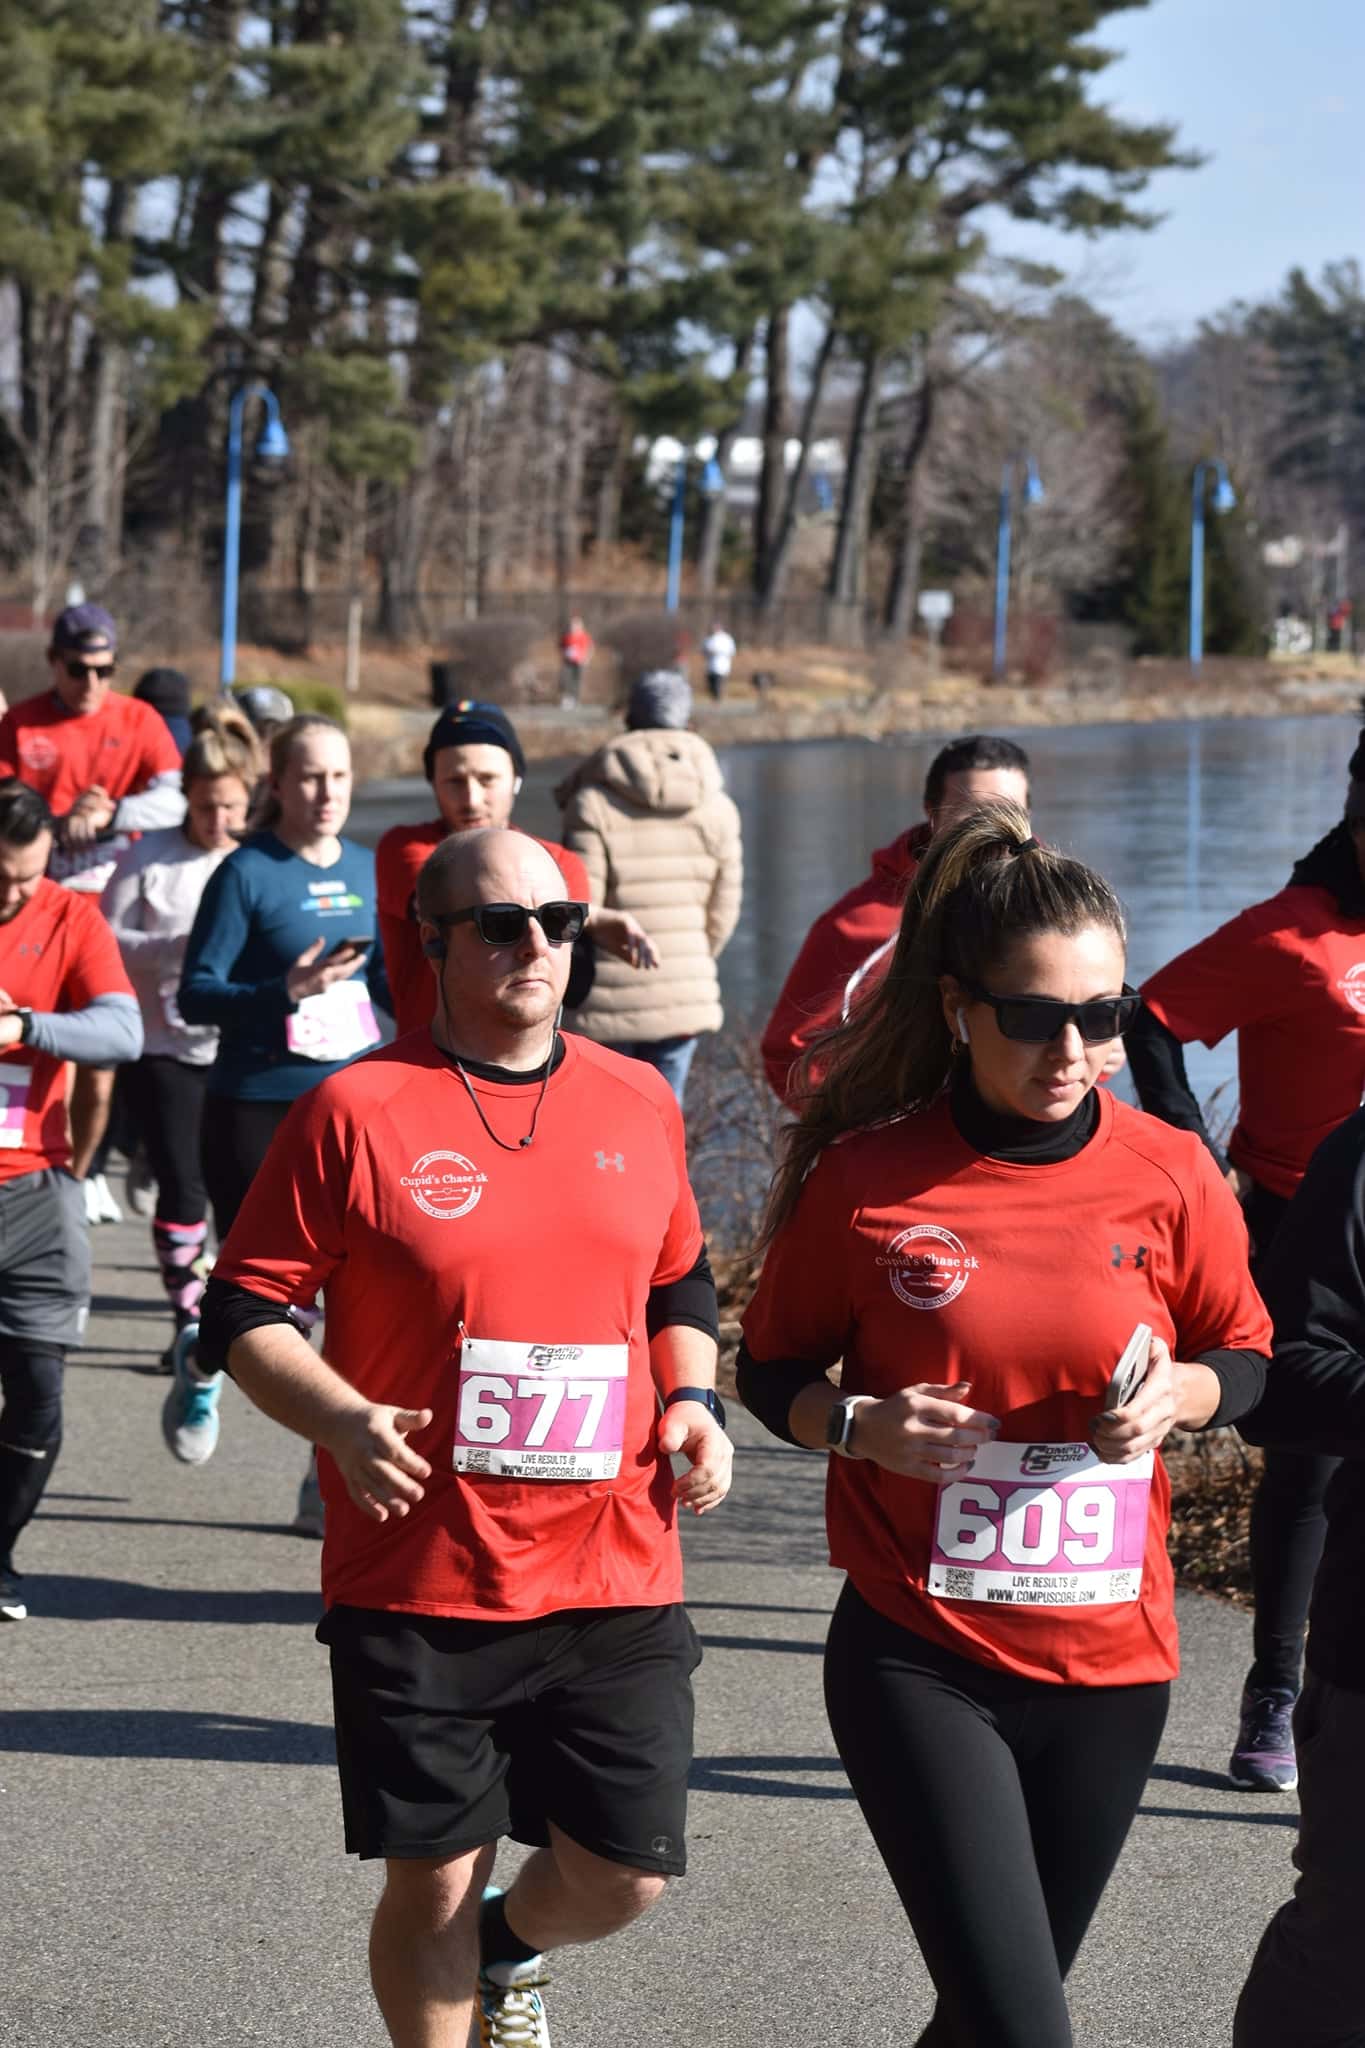 A pack of runners during a Cupid's Chase 5k